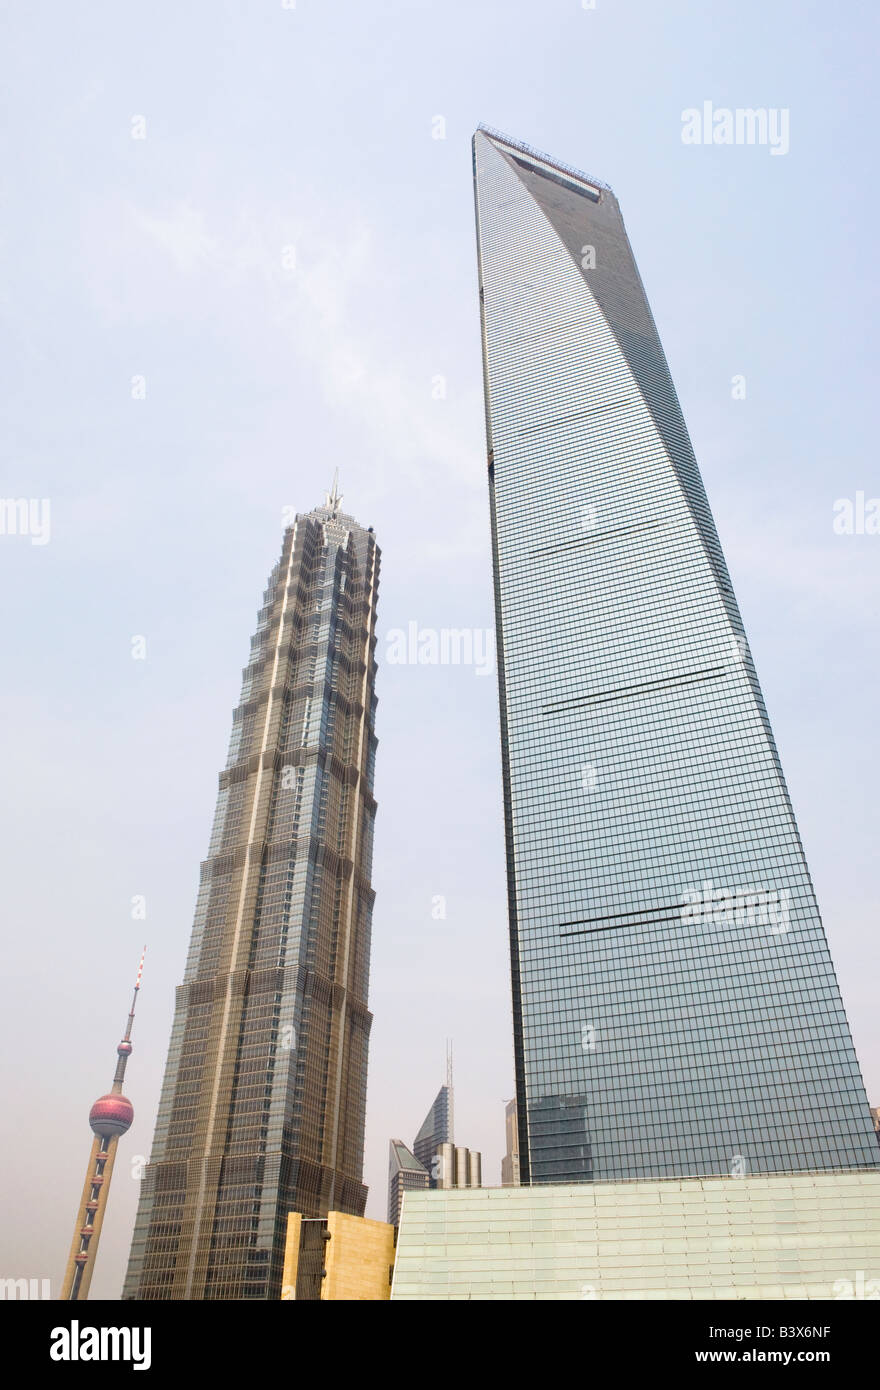 Oriental Pearl Tower, Jin Mao Tower and the Shanghai World Financial Center. Pudong, Shanghai, China. Stock Photo